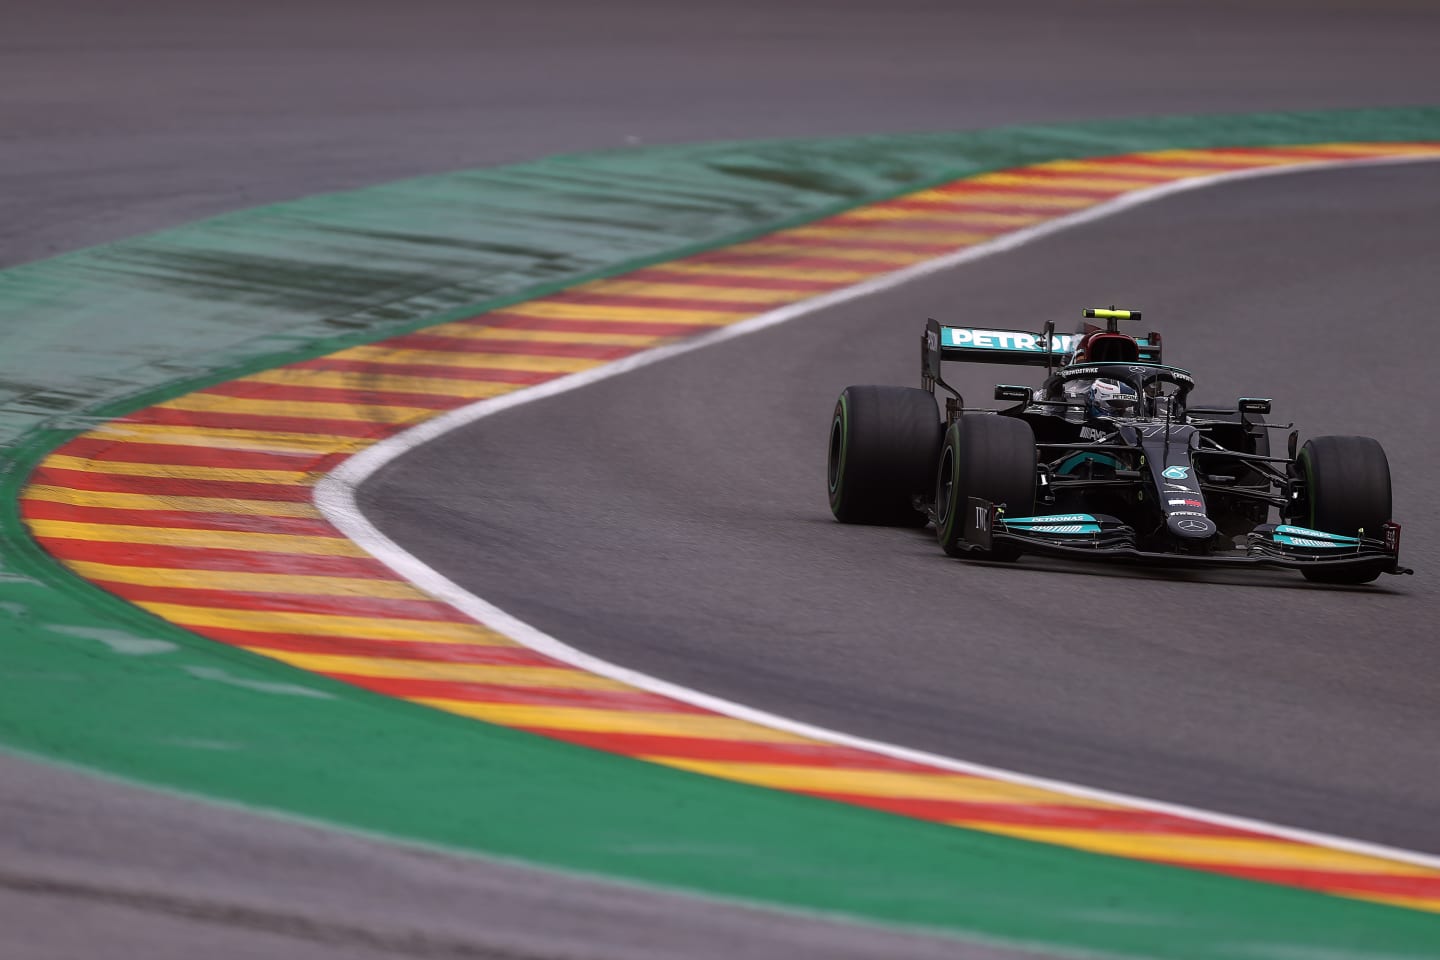 SPA, BELGIUM - AUGUST 28: Valtteri Bottas of Finland driving the (77) Mercedes AMG Petronas F1 Team Mercedes W12 during qualifying ahead of the F1 Grand Prix of Belgium at Circuit de Spa-Francorchamps on August 28, 2021 in Spa, Belgium. (Photo by Lars Baron/Getty Images)